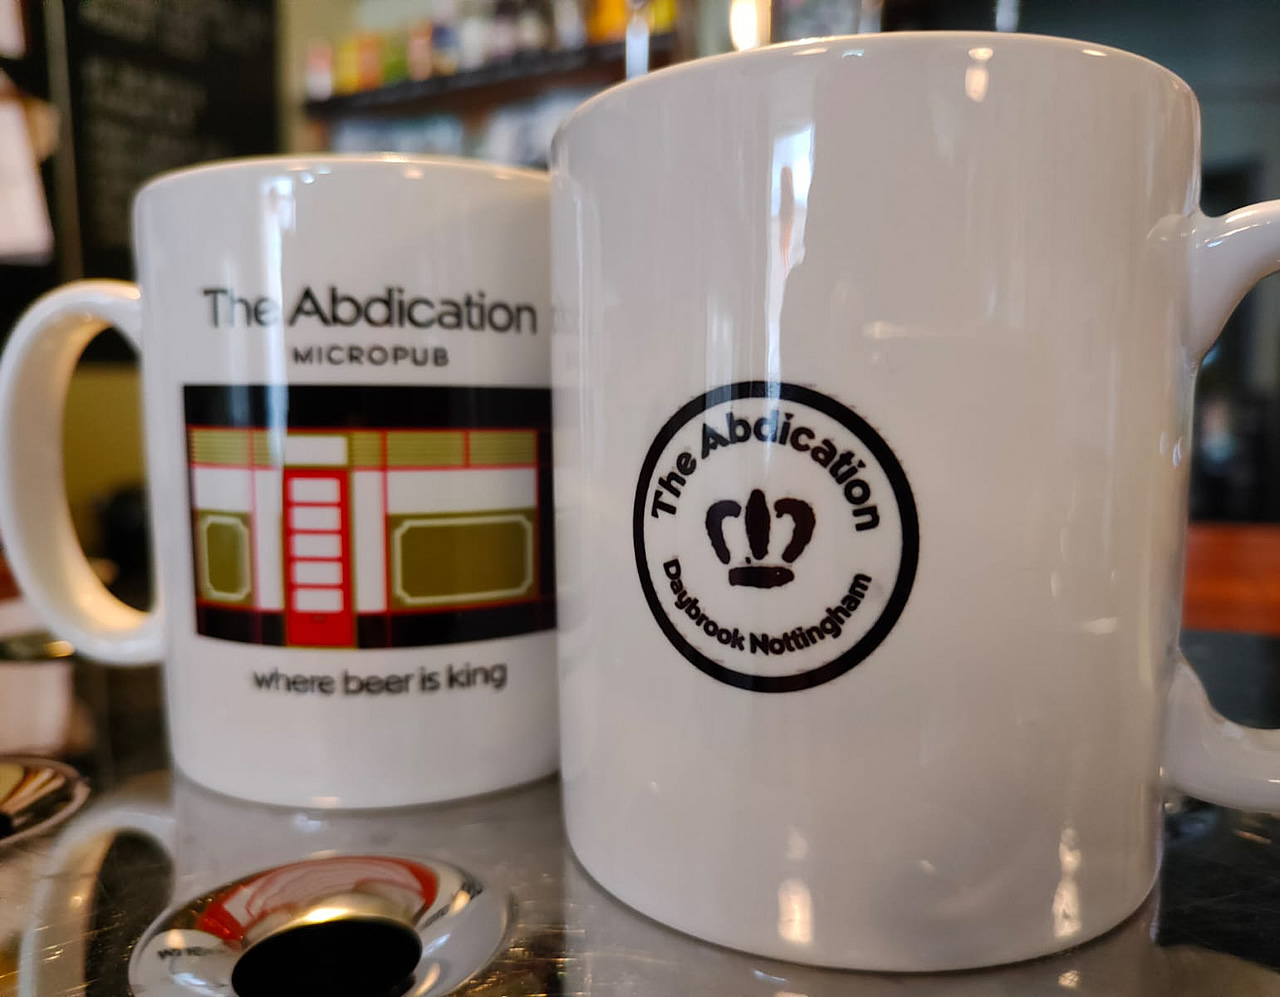 Abdication Mug - Merchandise for sale in the pub